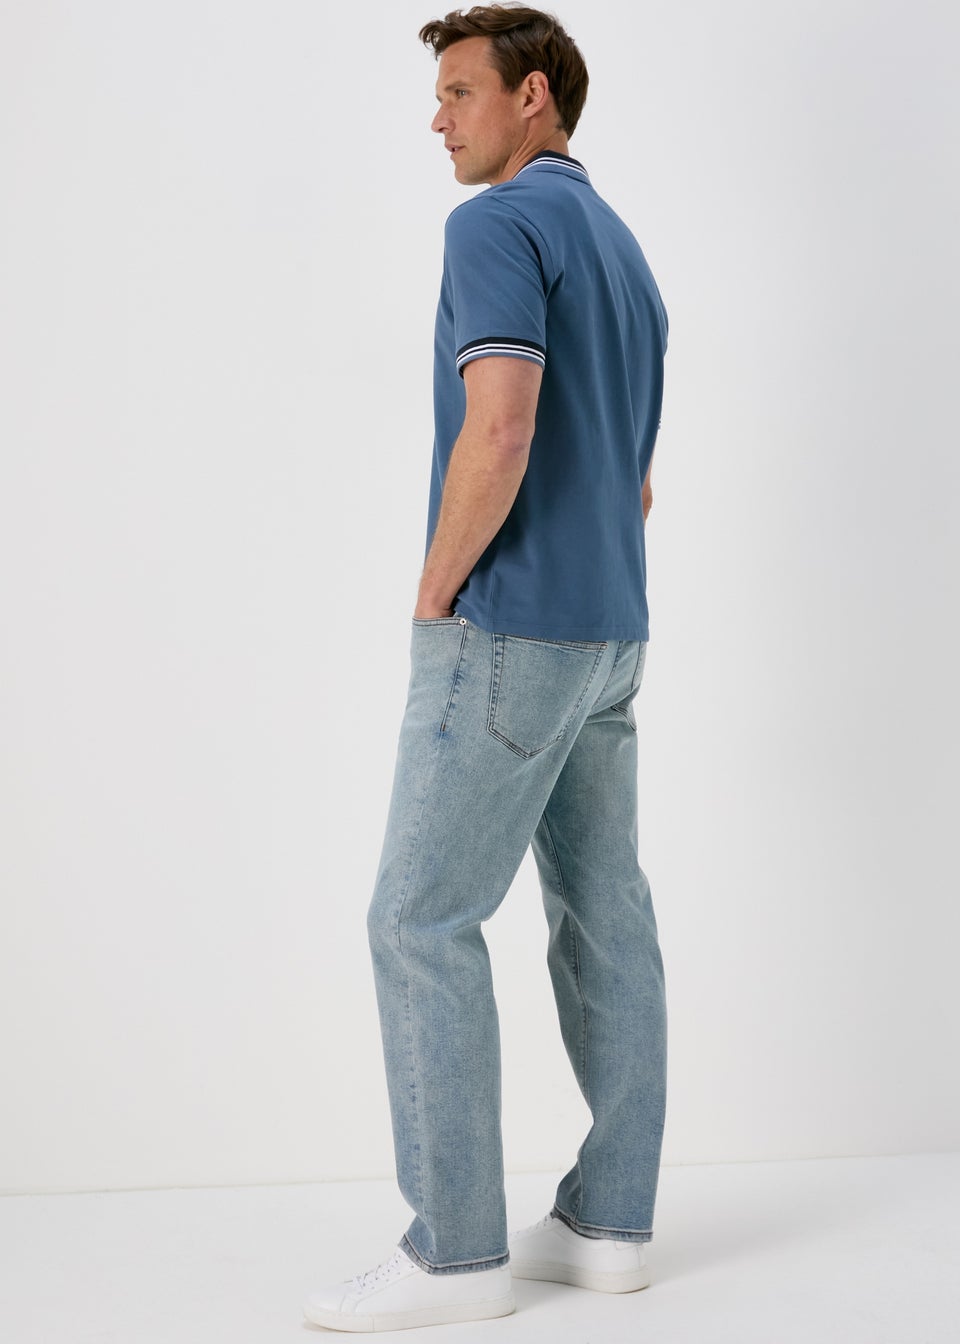 Blue Light Wash Straight Fit Jeans